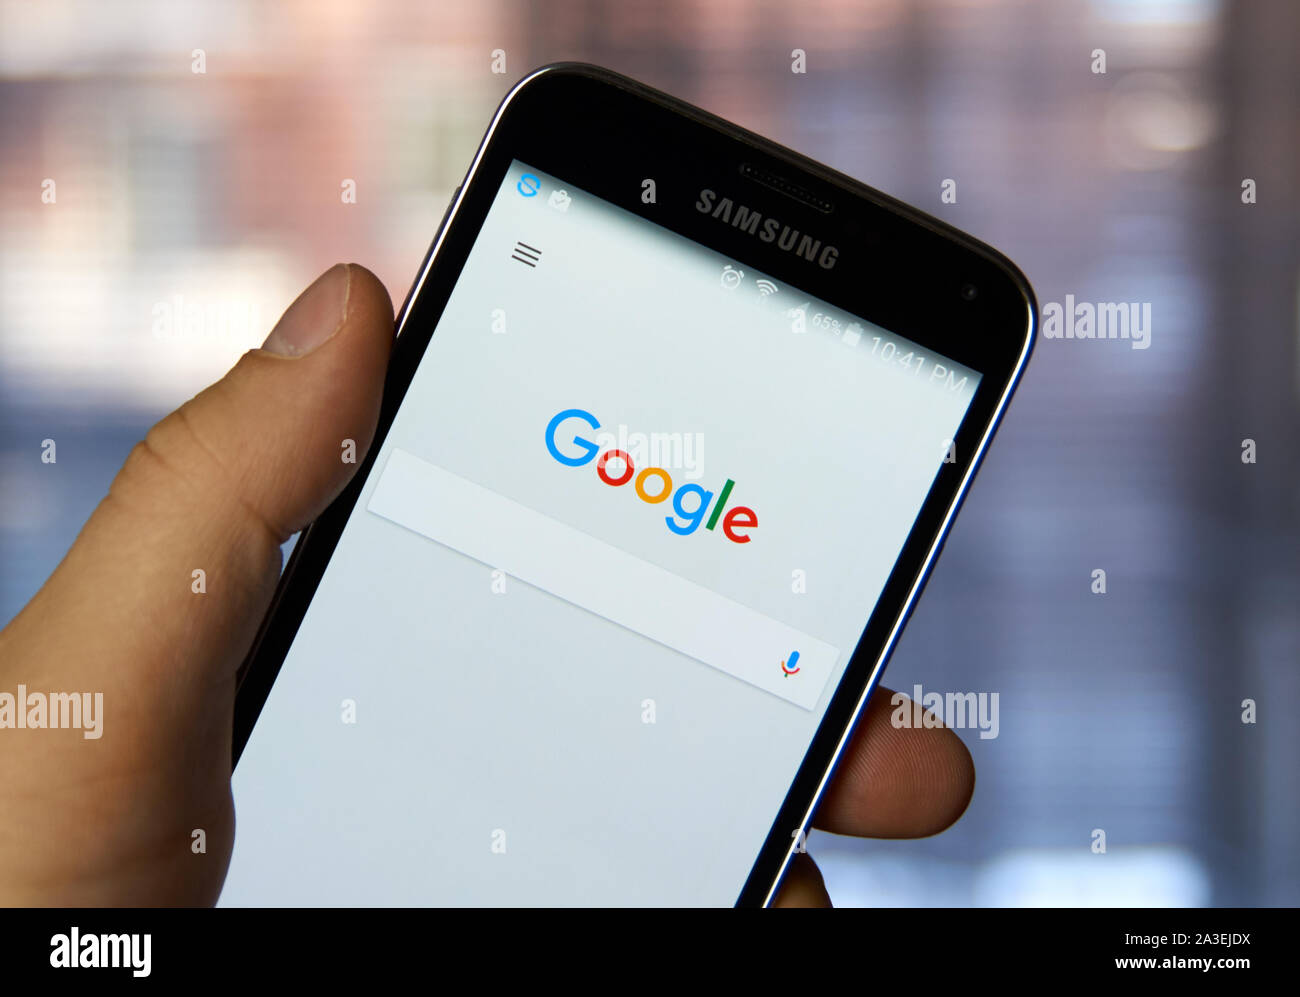 MONTREAL, CANADA - MARCH 4, 2016 - Google mobile application on Samsung device's screen in a hand. Google is well known for it's web search engine. Stock Photo